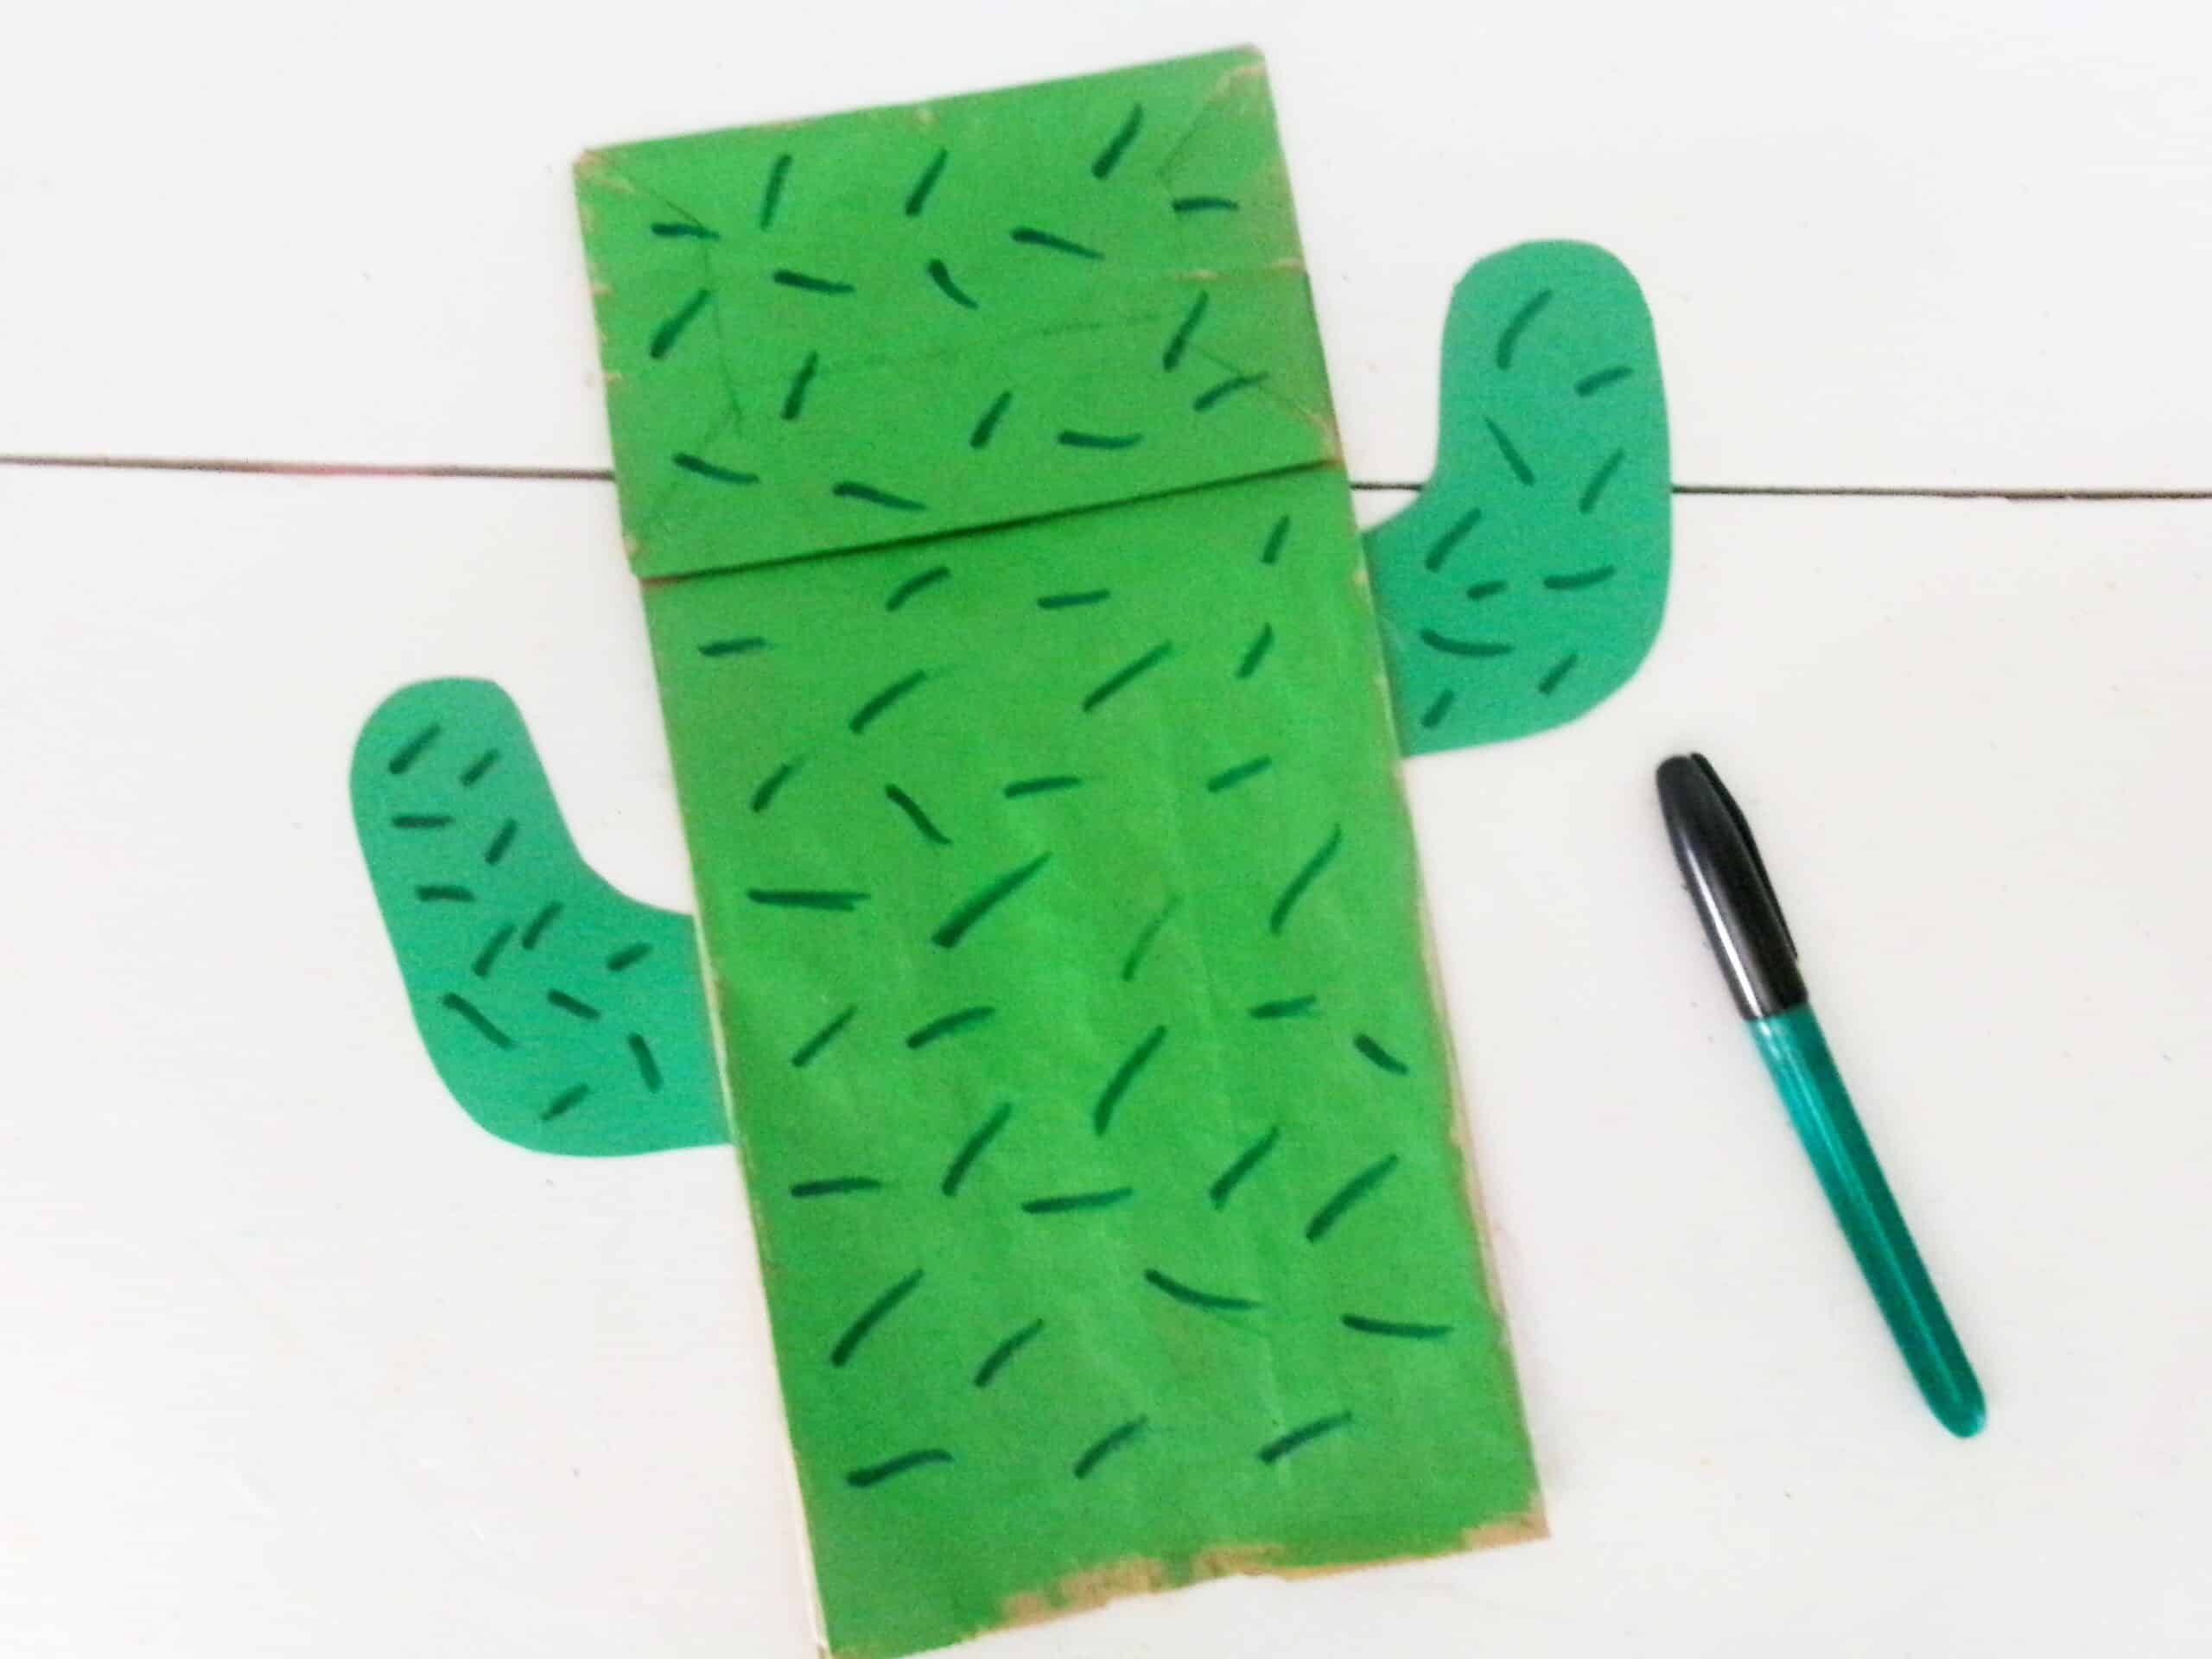 Using a green marker, randomly add dashes all around the cactus to make thorns.